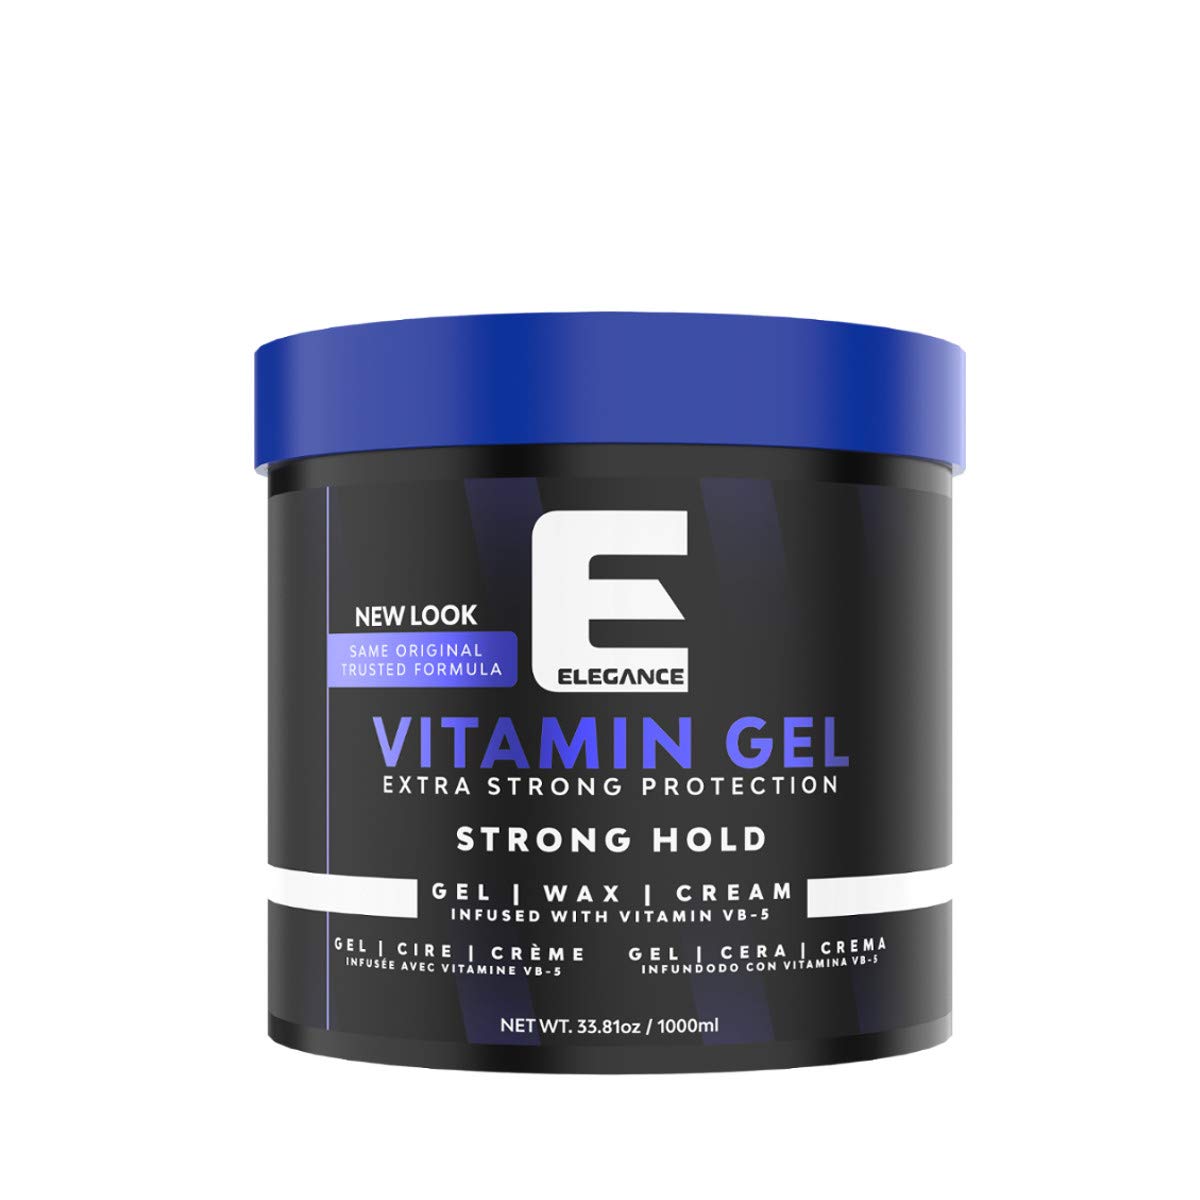 ELEGANCE - Vitamin Gel, Extra Strong Protection, Strong Hold 33.81oz.